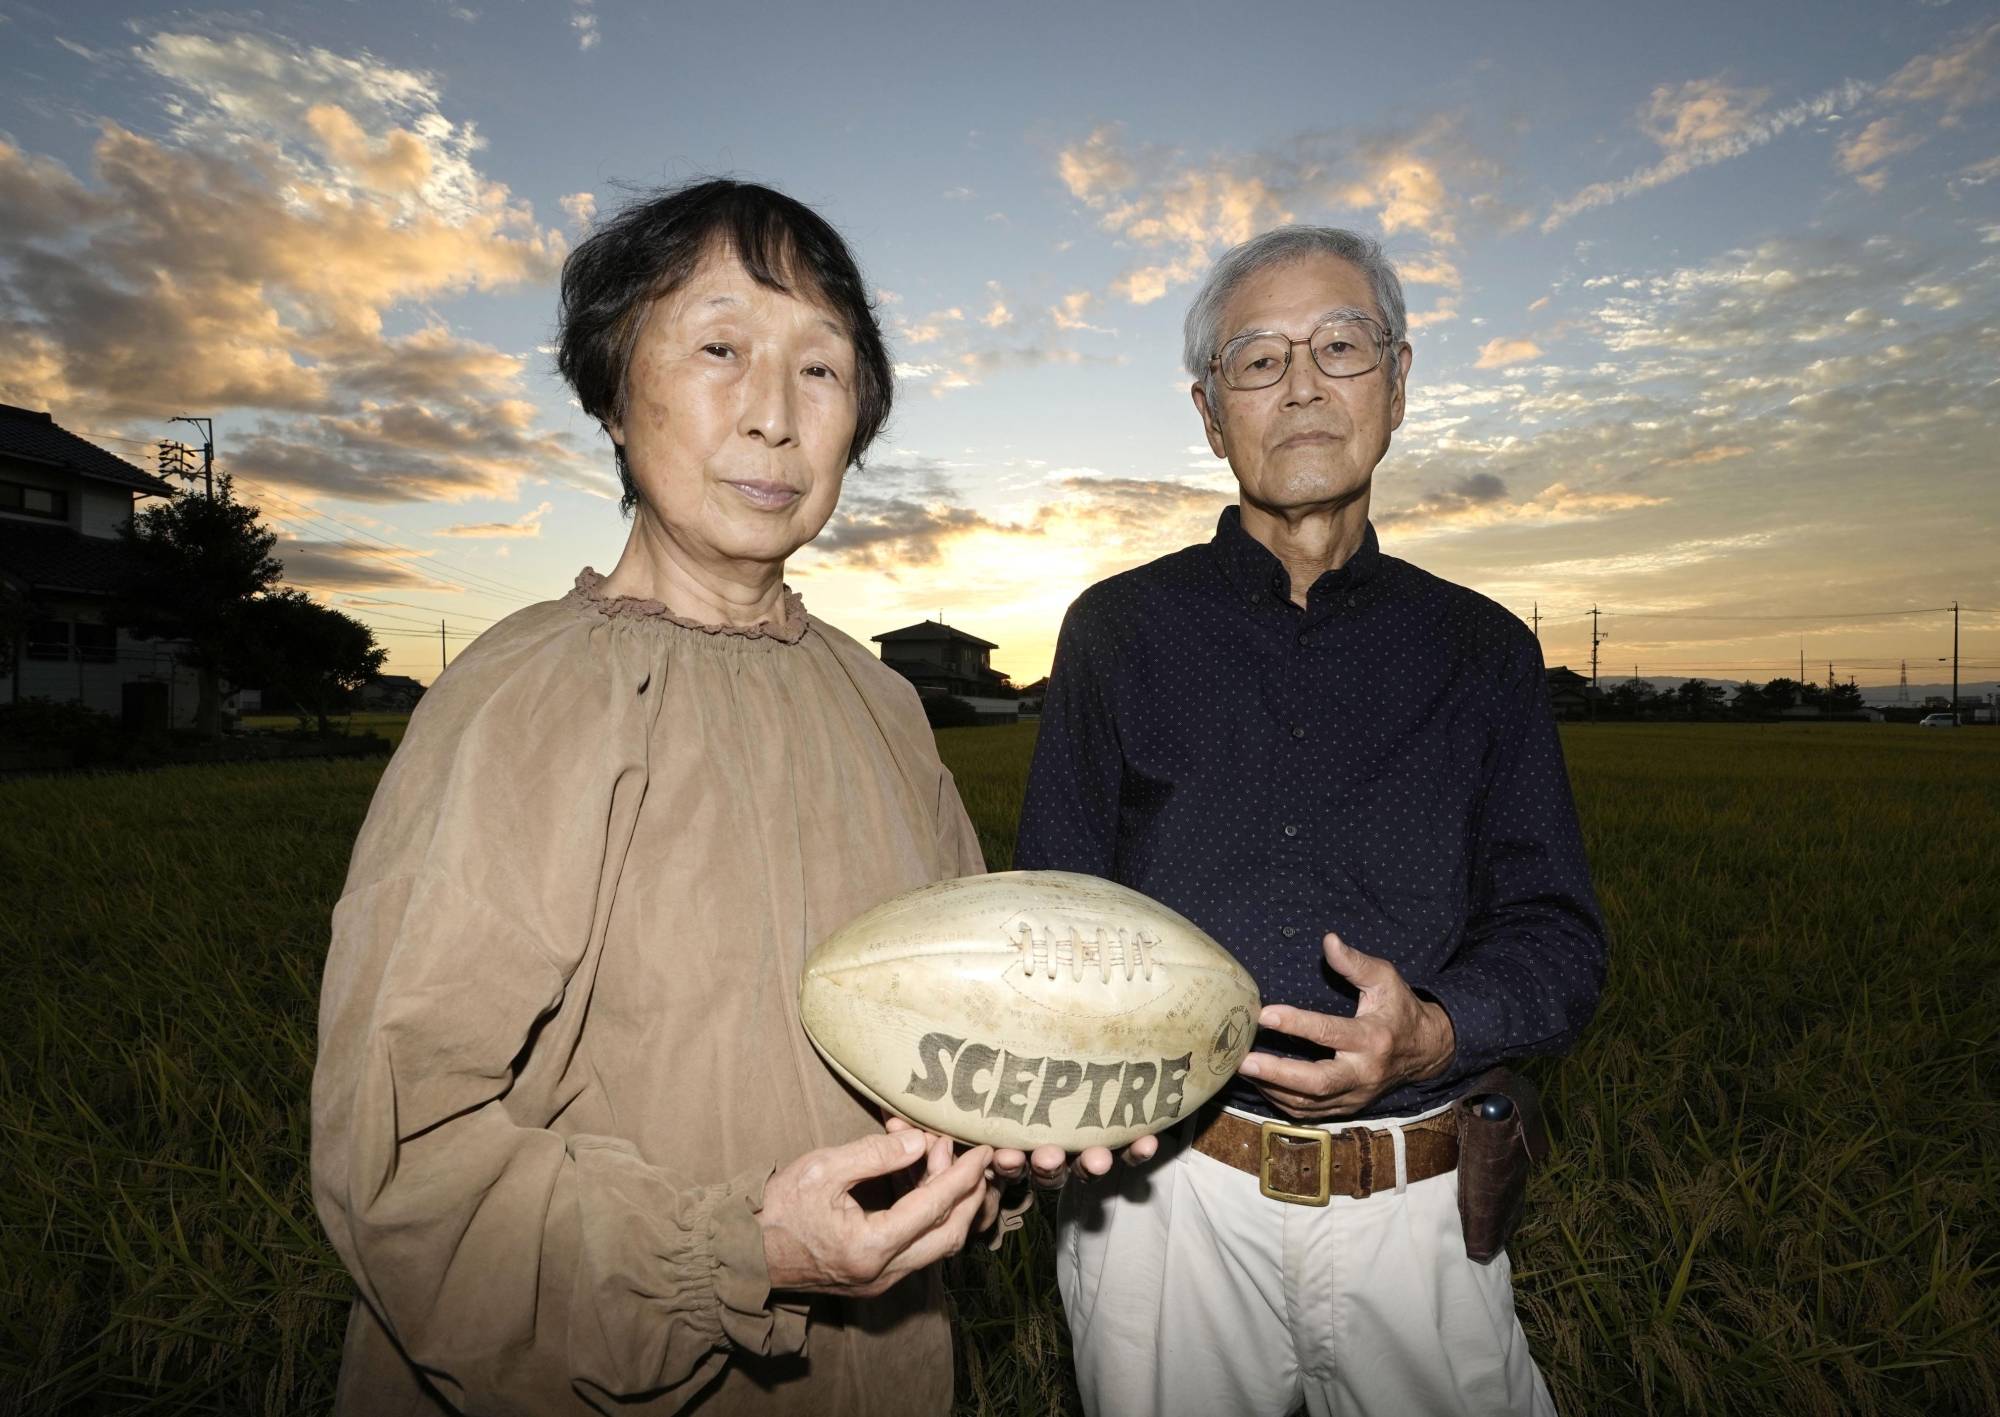 Mieko and Masaichi Hattori — mother and father of Yoshihiro Hattori, who was shot in 1992 in Louisiana — hold a rugby ball with a message written by their son's former classmate, on Oct. 14 in Nagoya. | KYODO